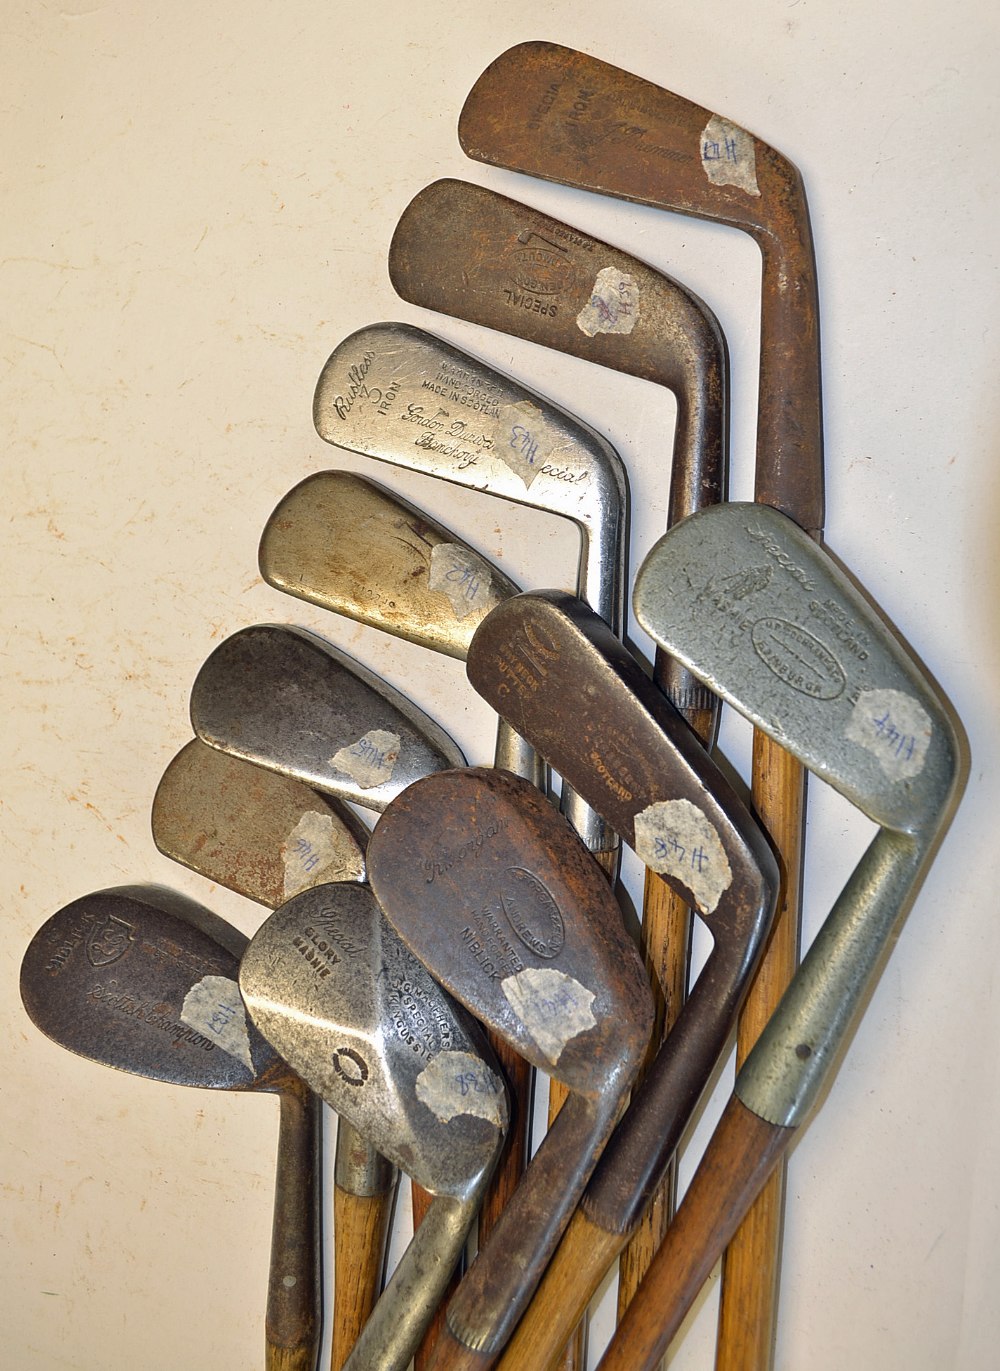 11x various irons and putters - all in need of restoration, to incl 9x irons notable makers